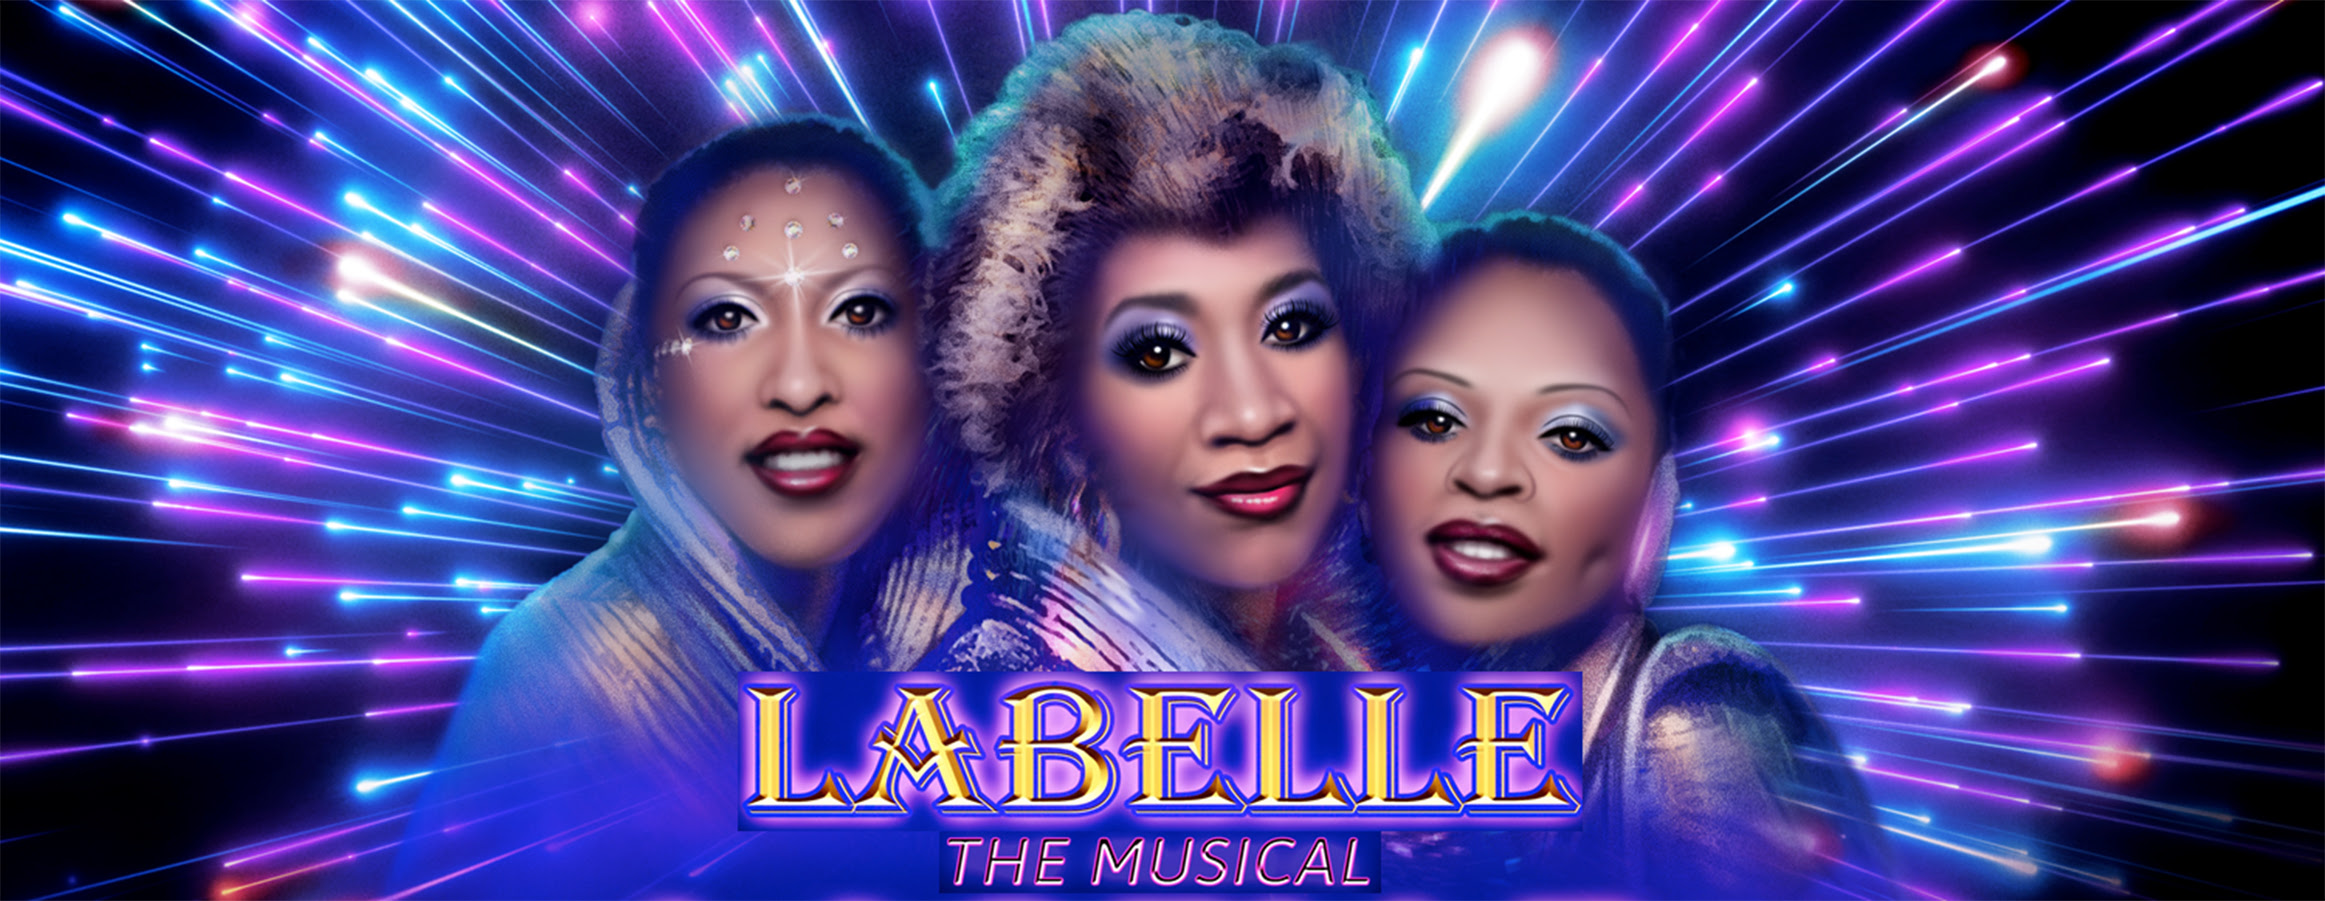 Labelle the Musical